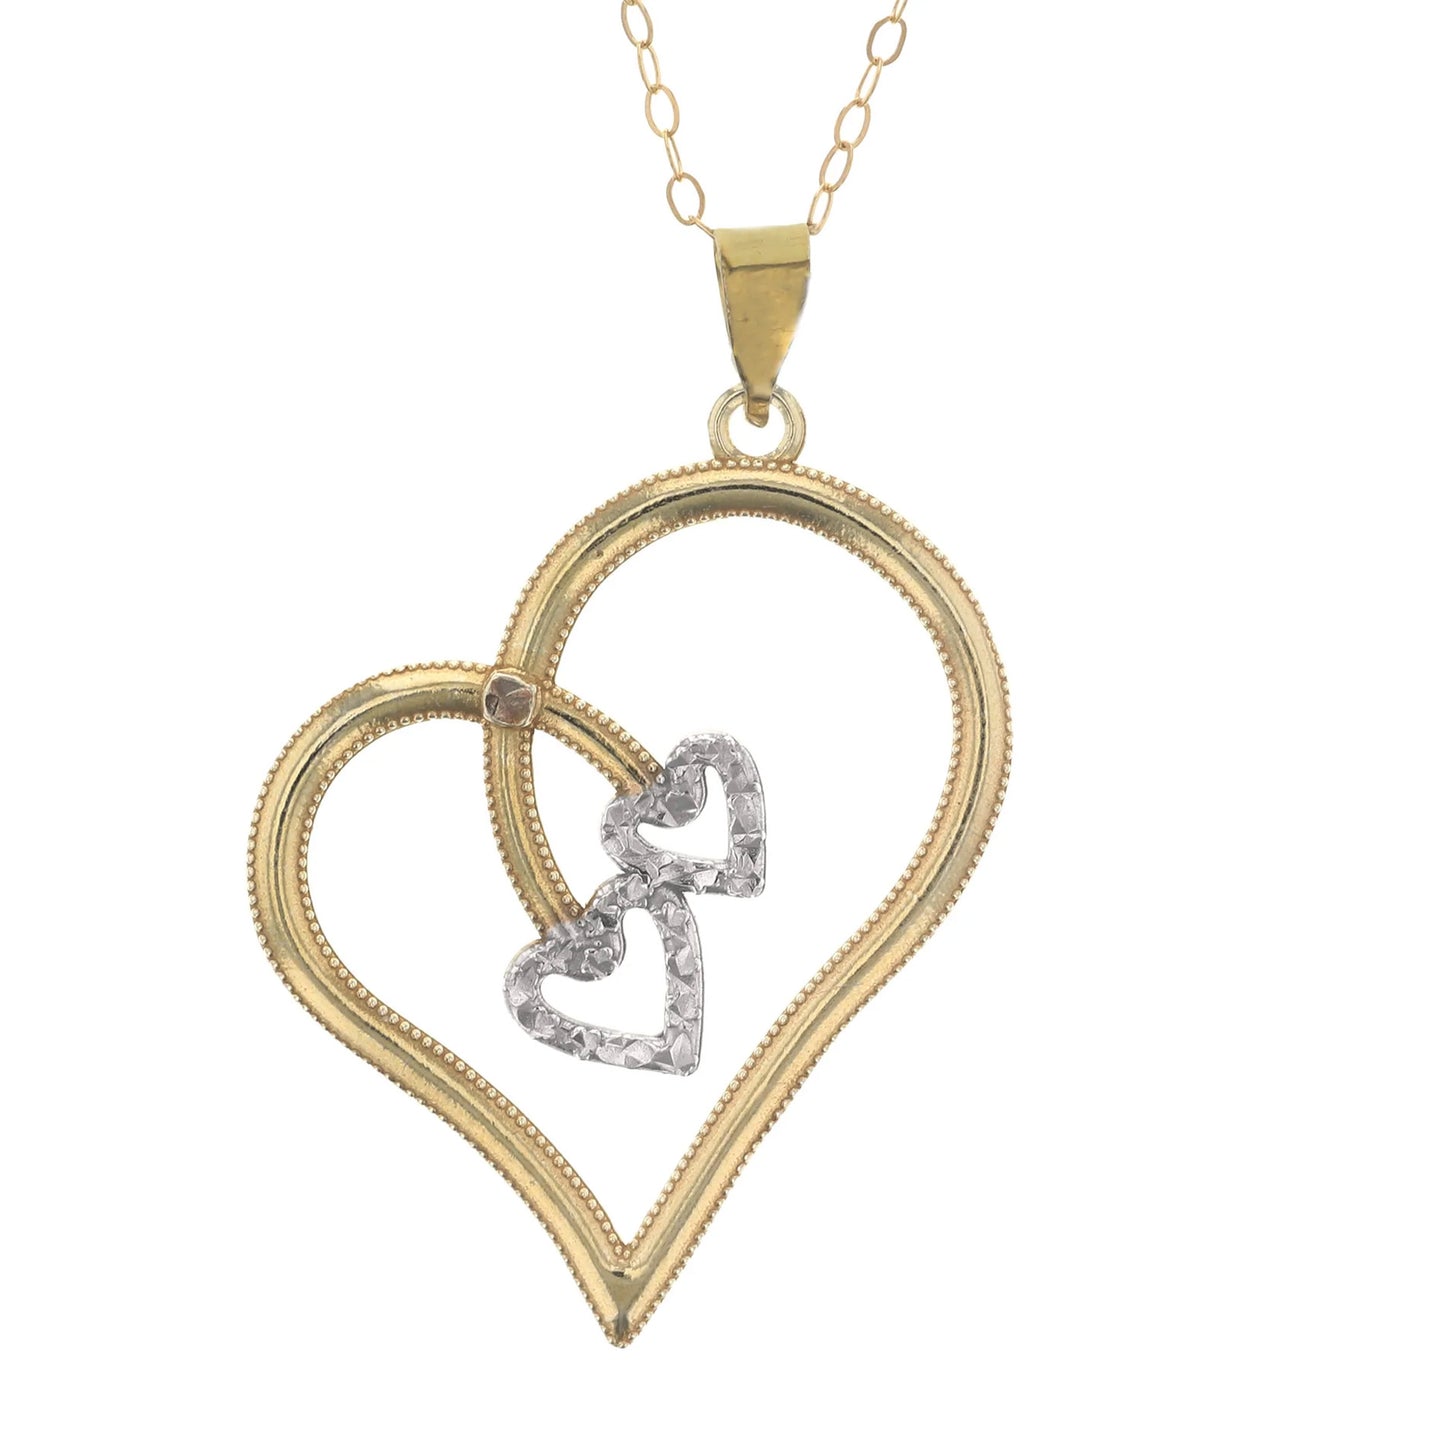 Gold Plated Sterling Silver Diamond Cut Tripple Heart Pendant Necklace